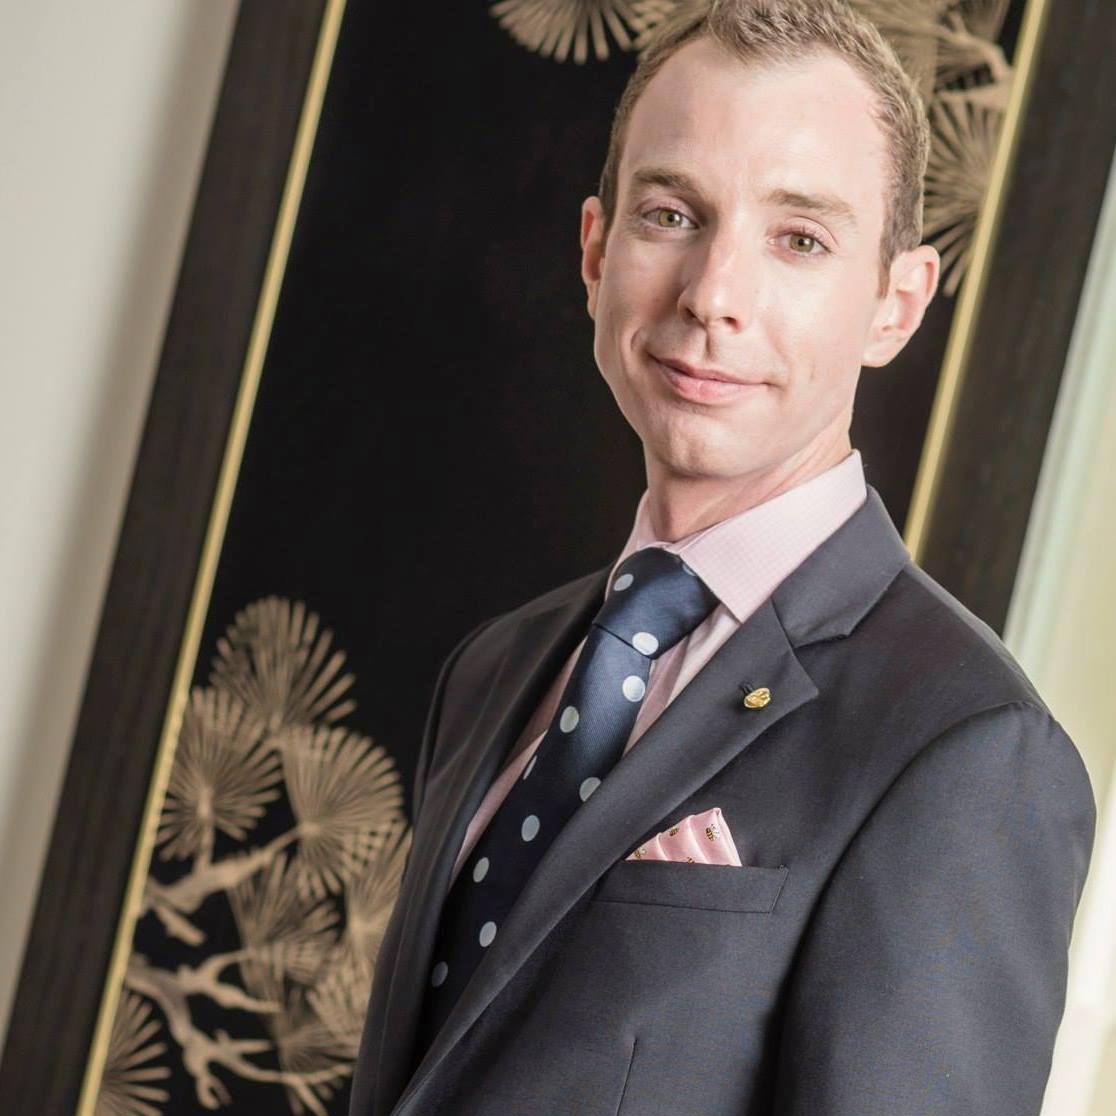 A 12-year veteran of the spa and hospitality industry, Myers has been serving as director of spa at Chuan Spa Chicago at The Langham for the last four years / 